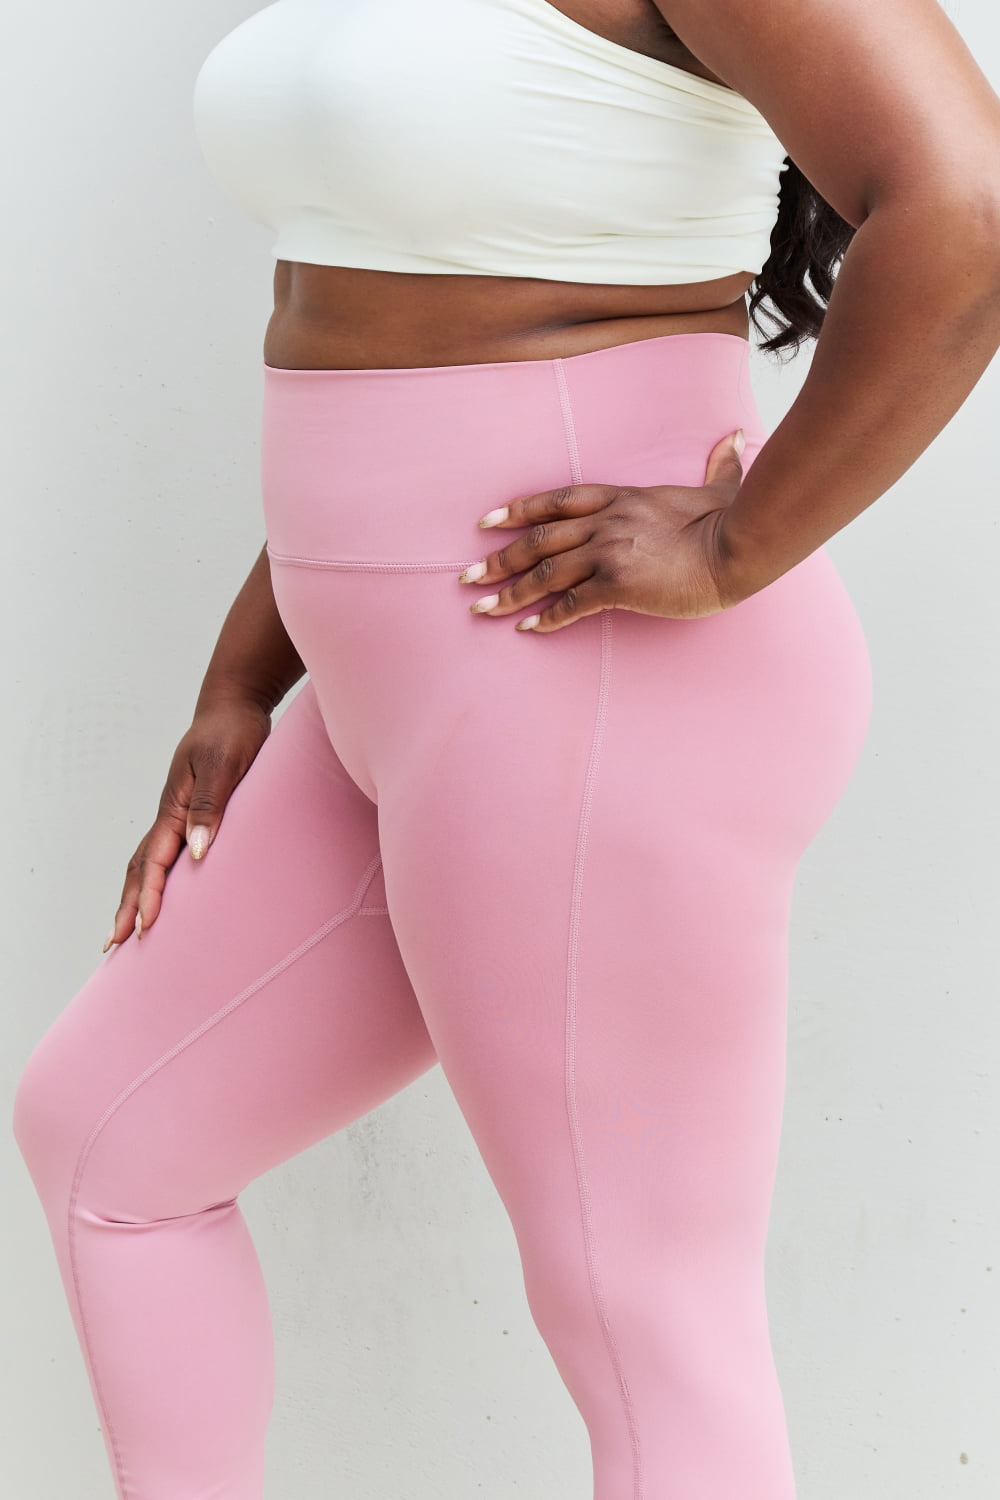 Zenana Fit For You Full Size High Waist Active Leggings in Light Rose - A Better You